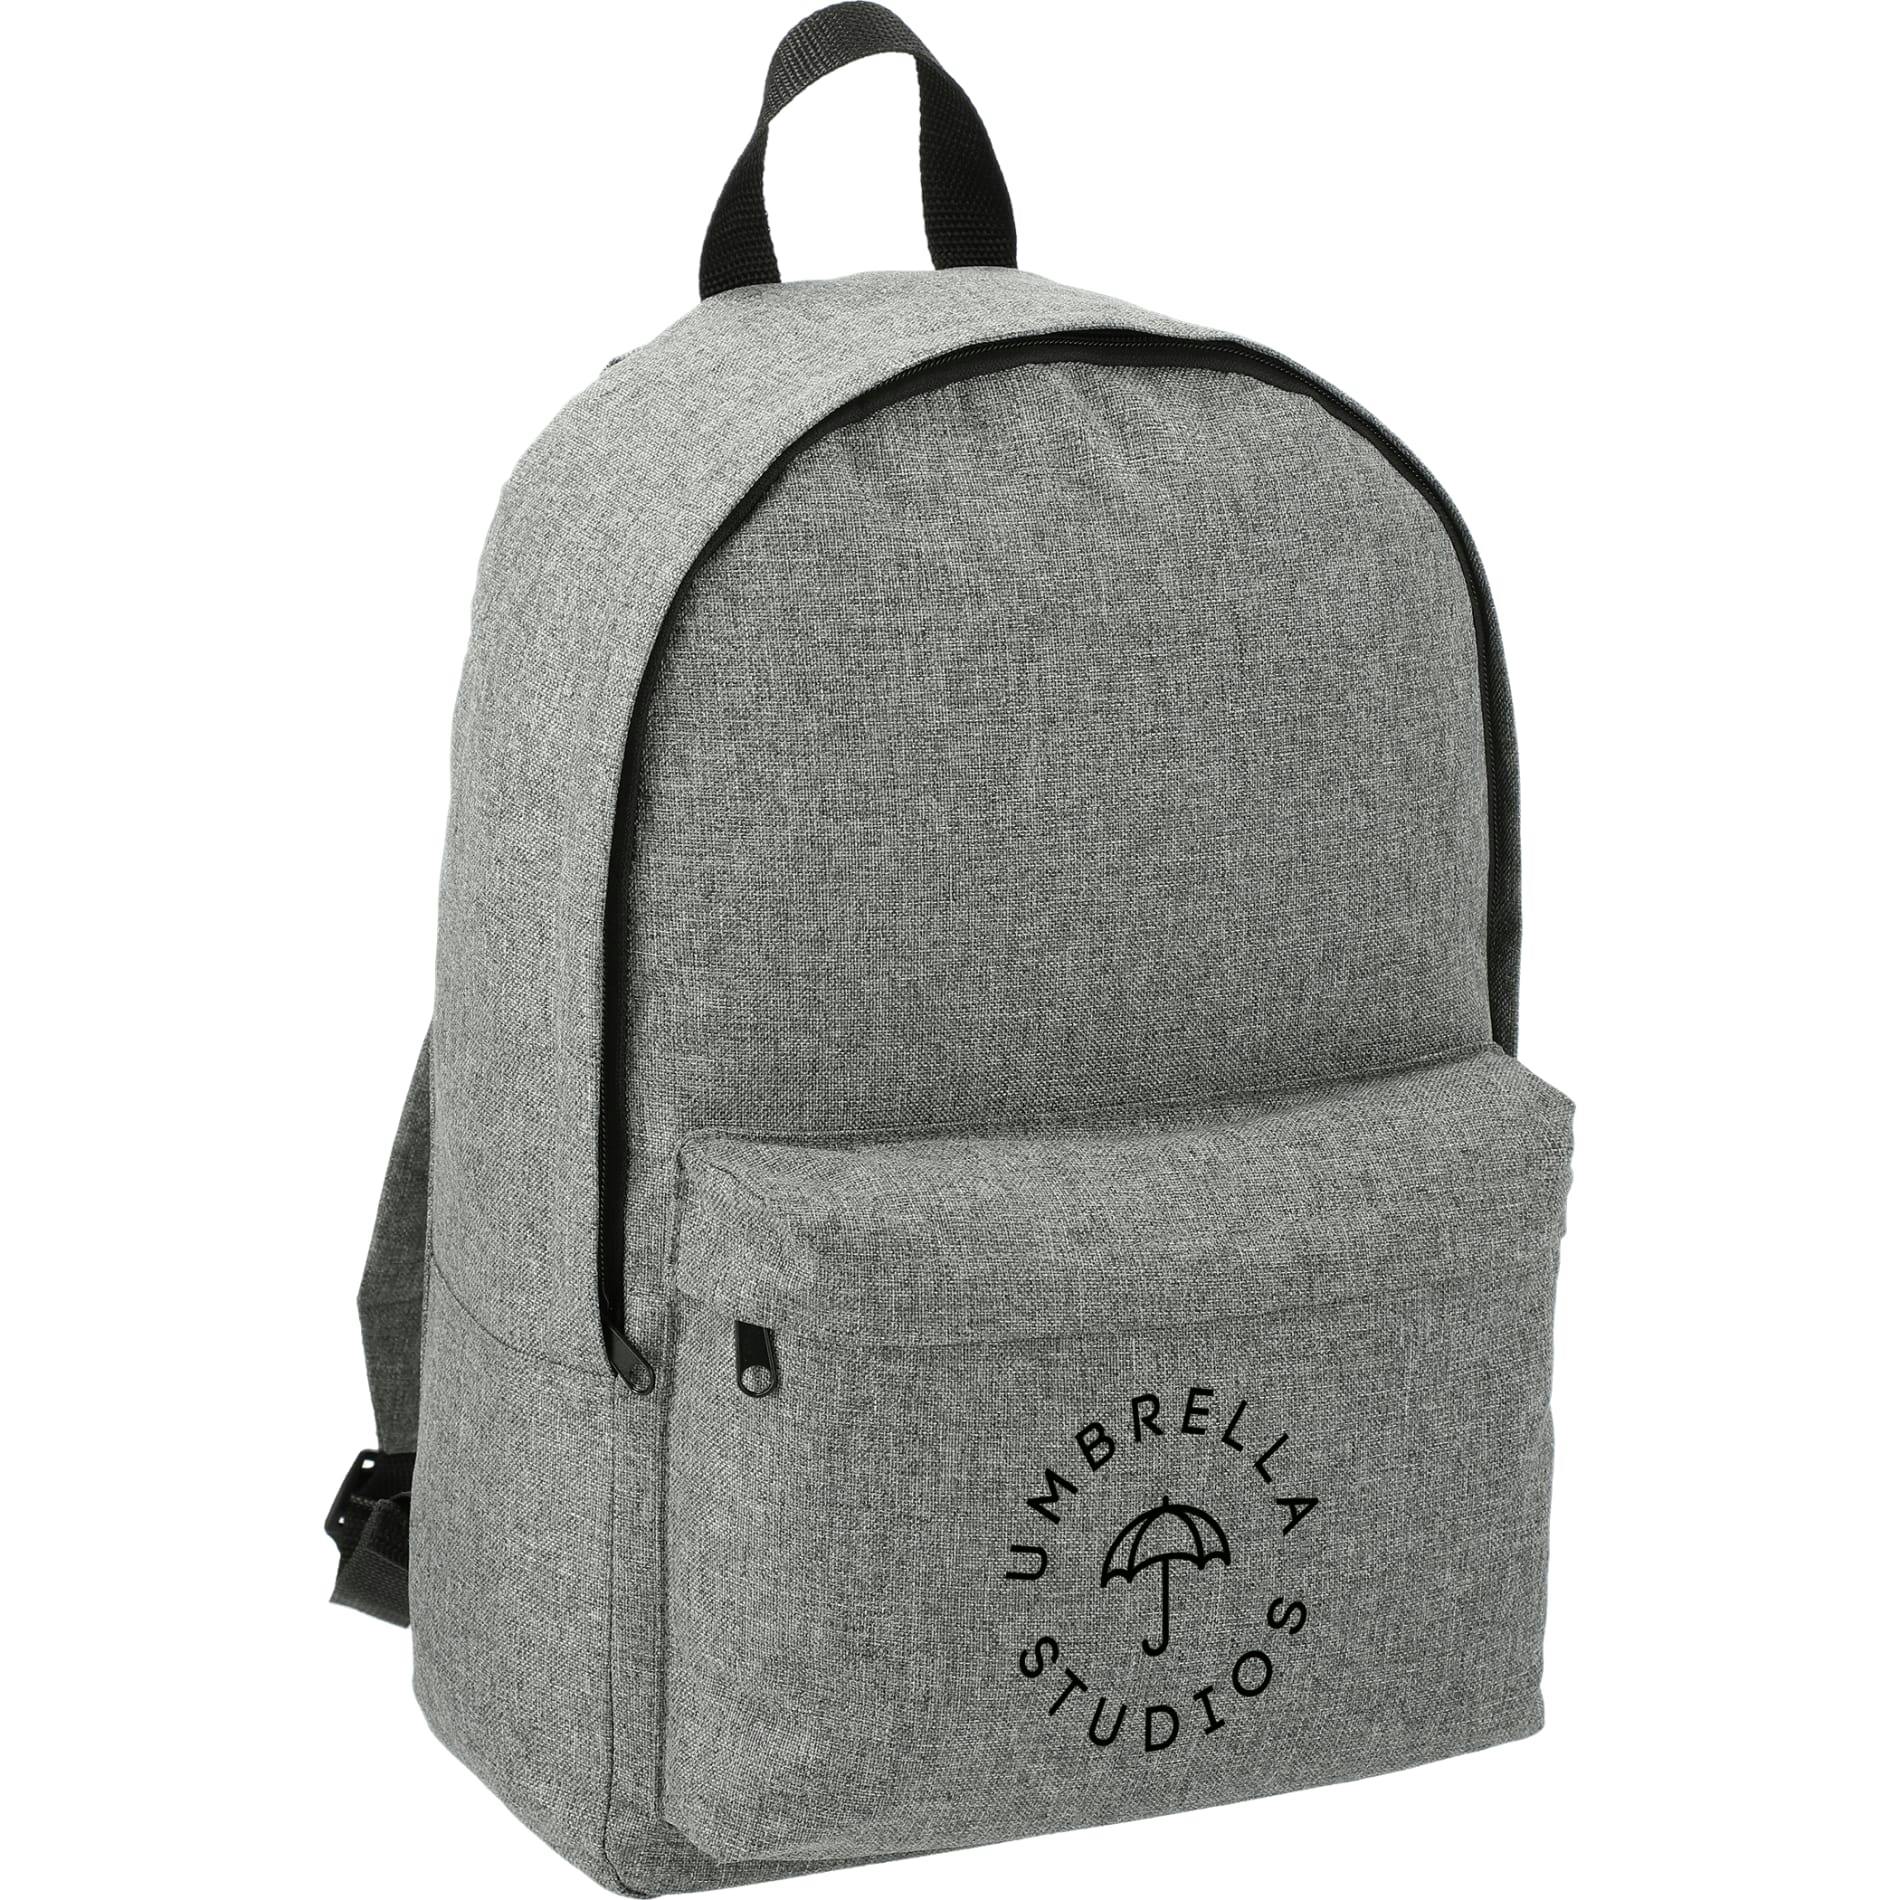 Reign Backpack - additional Image 1